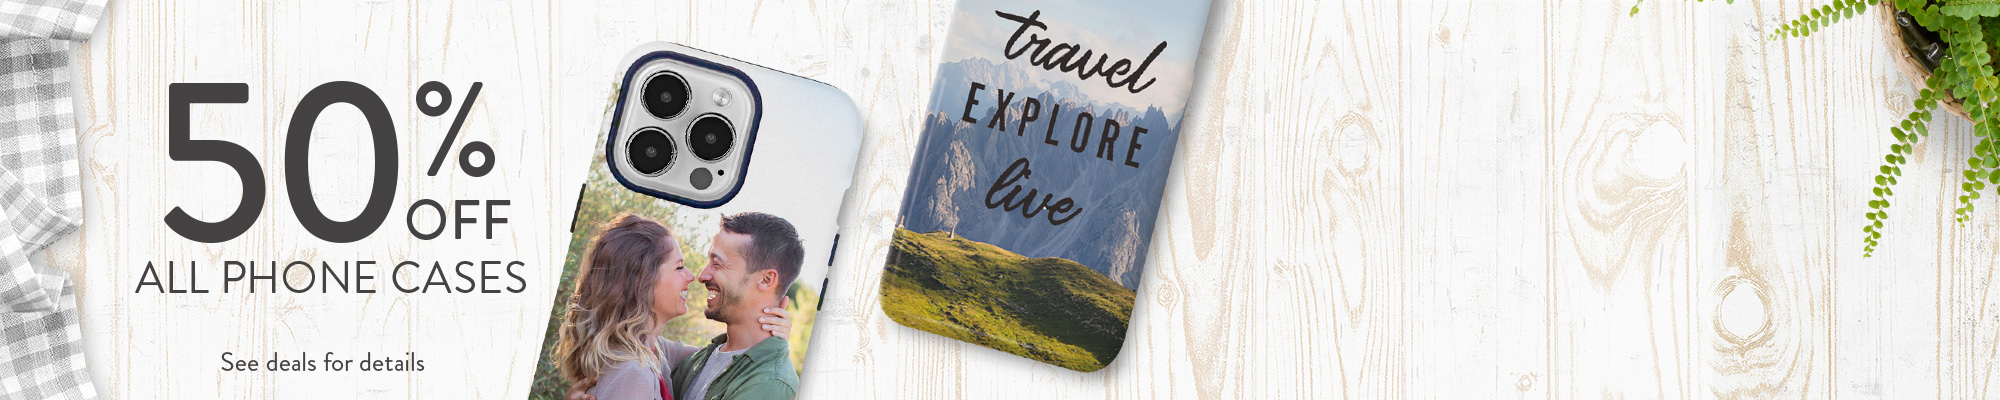 Mobile Phone Cases and Covers Image 